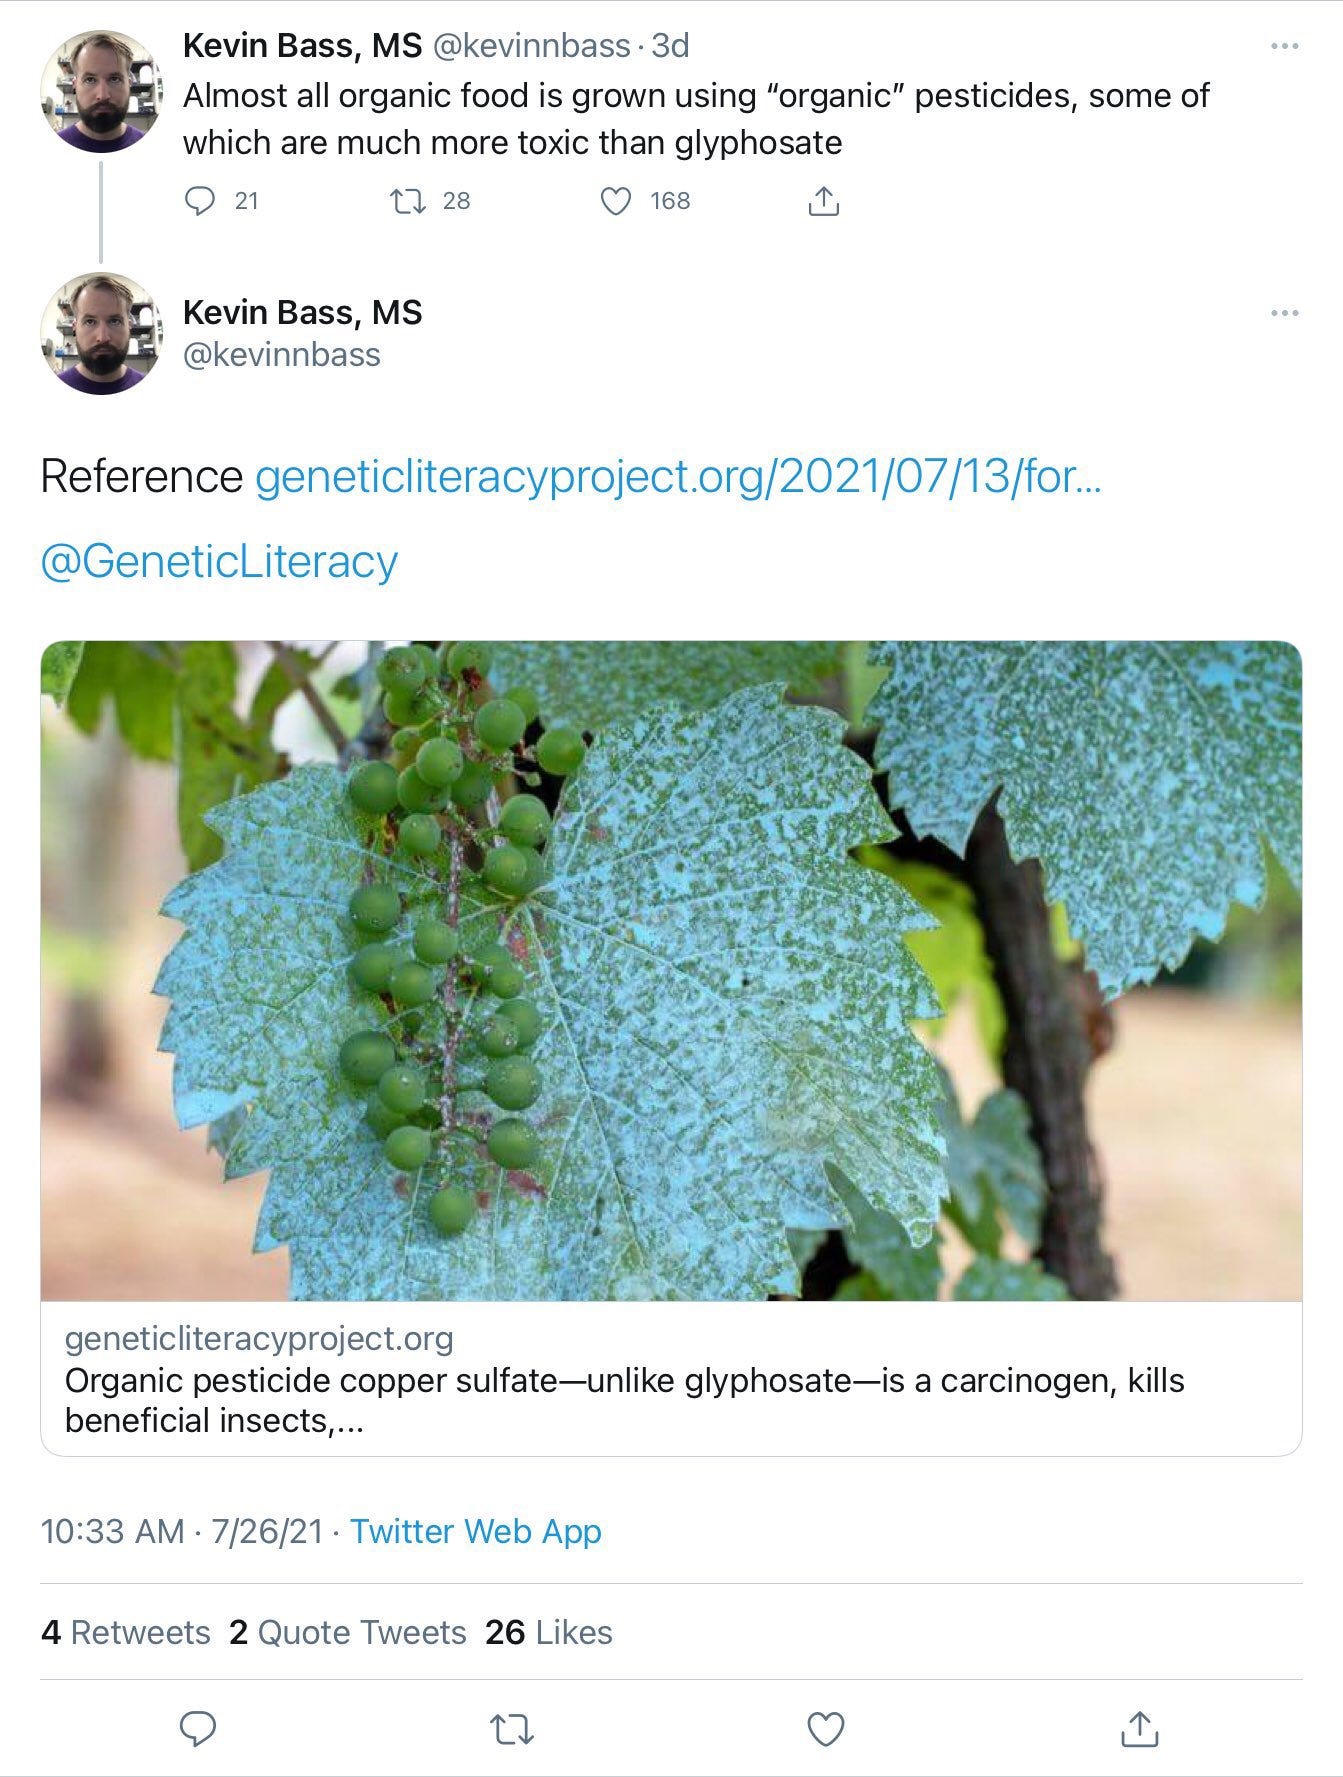 Tweets by @kevinnbass.  “Almost all organic food is grown using “organic” pesticides, some of which are more toxic than glyphosate.”  “Reference Genetic Literacy Project .org link with picture of powdery mildew on grape leaves. Headline reads, ‘Organic pesticide copper sulfate – unlike glyphosate – is a carcinogen, kills beneficial insects,…’